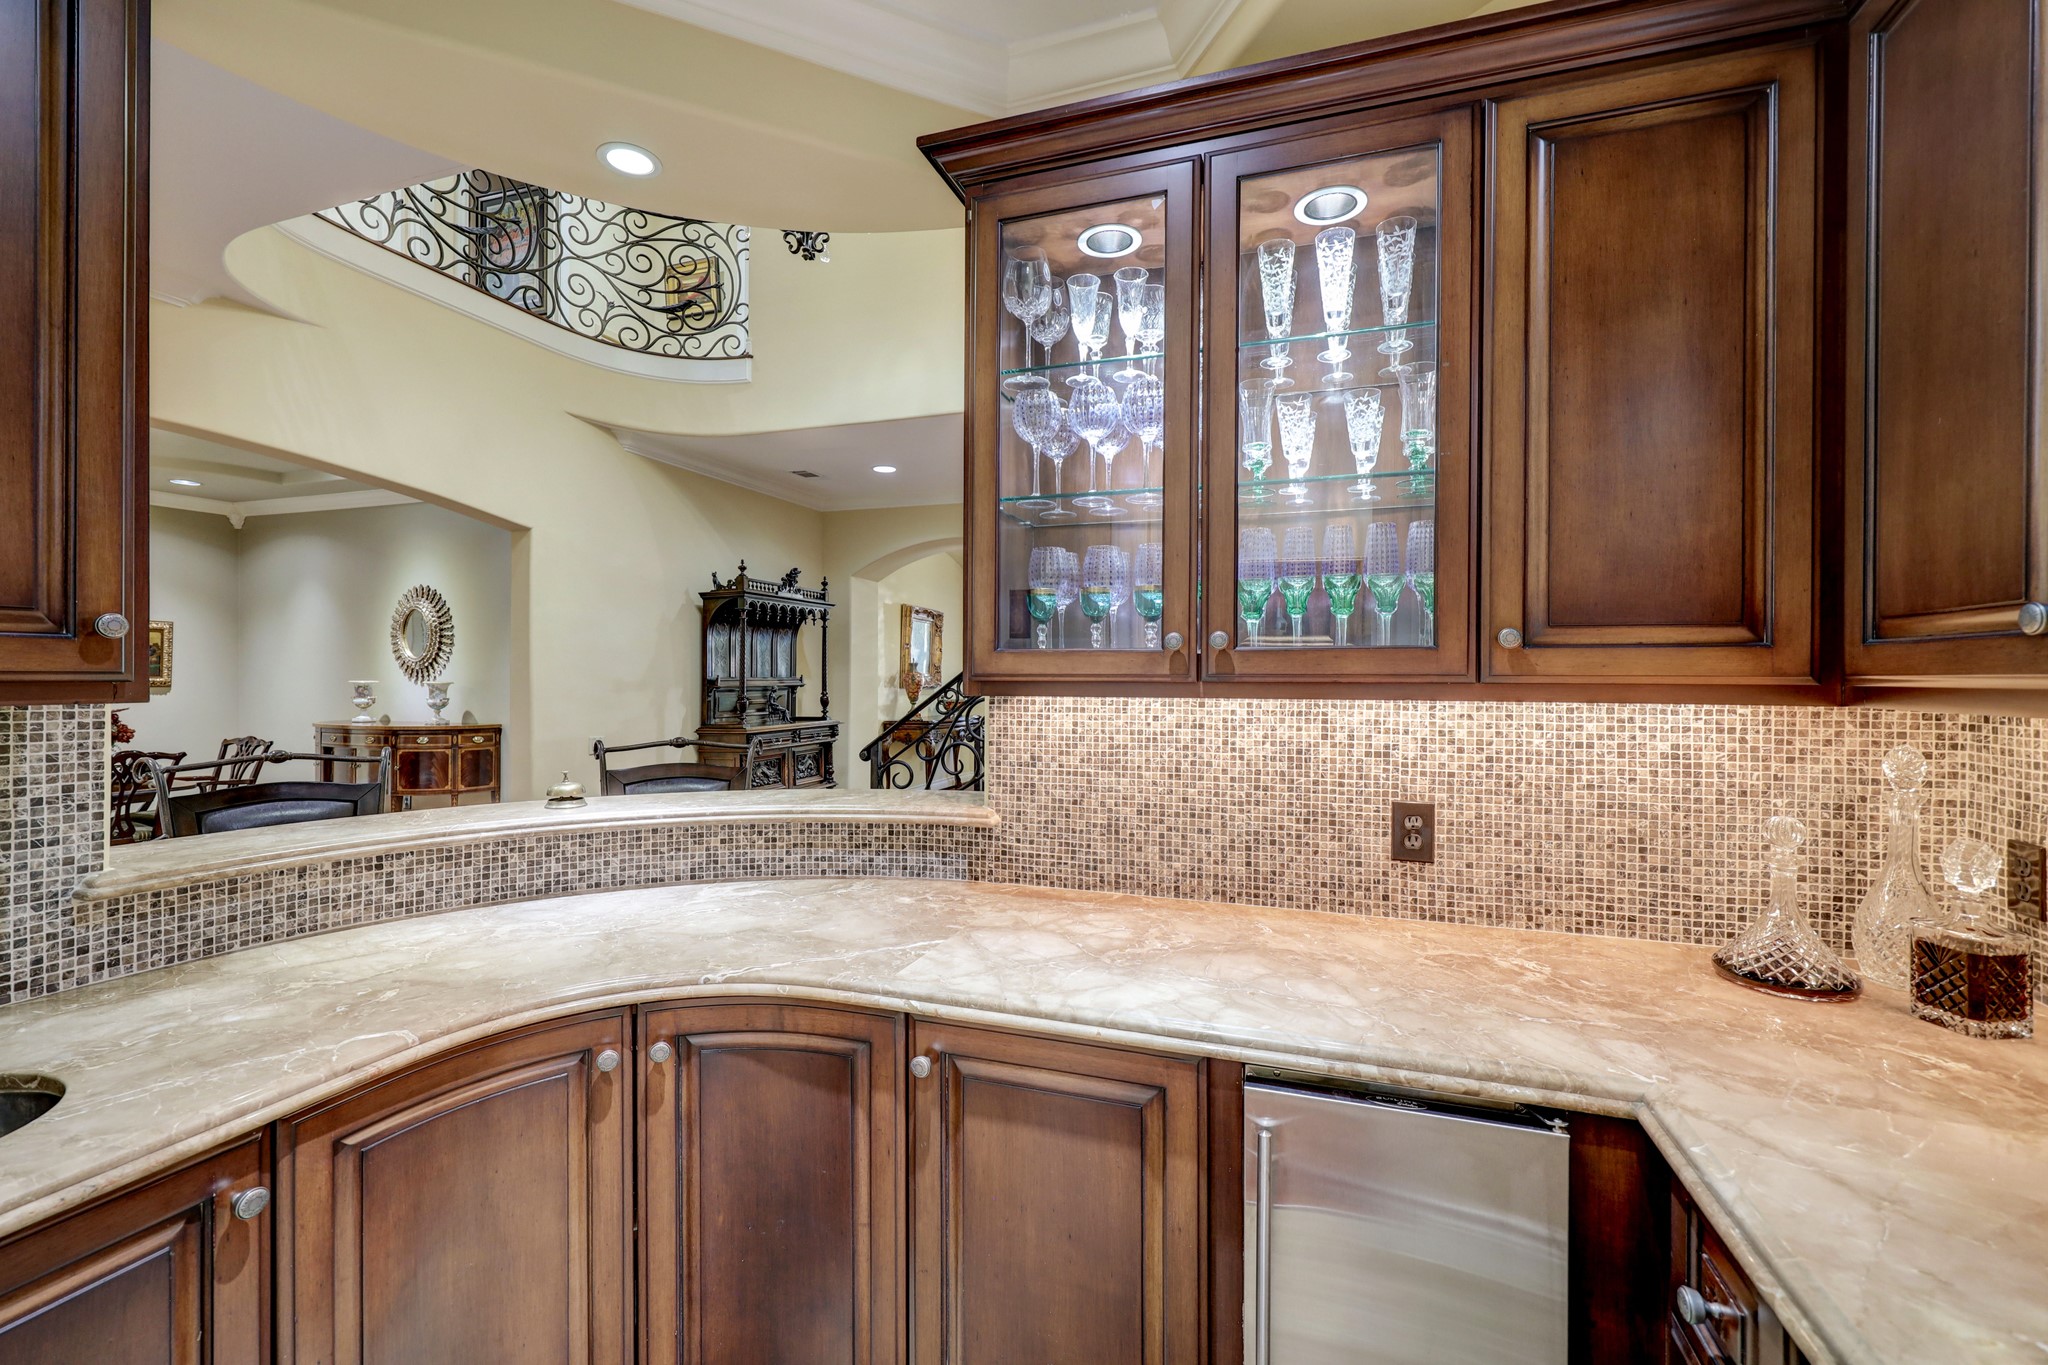 The Walk-in Wet Bar [9 x 6] features marble countertops with a mosaic tile backsplash, round bar sink, icemaker, under cabinet lighting, glass front display cabinets with glass shelves and lighting, and a pass through to the Foyer.